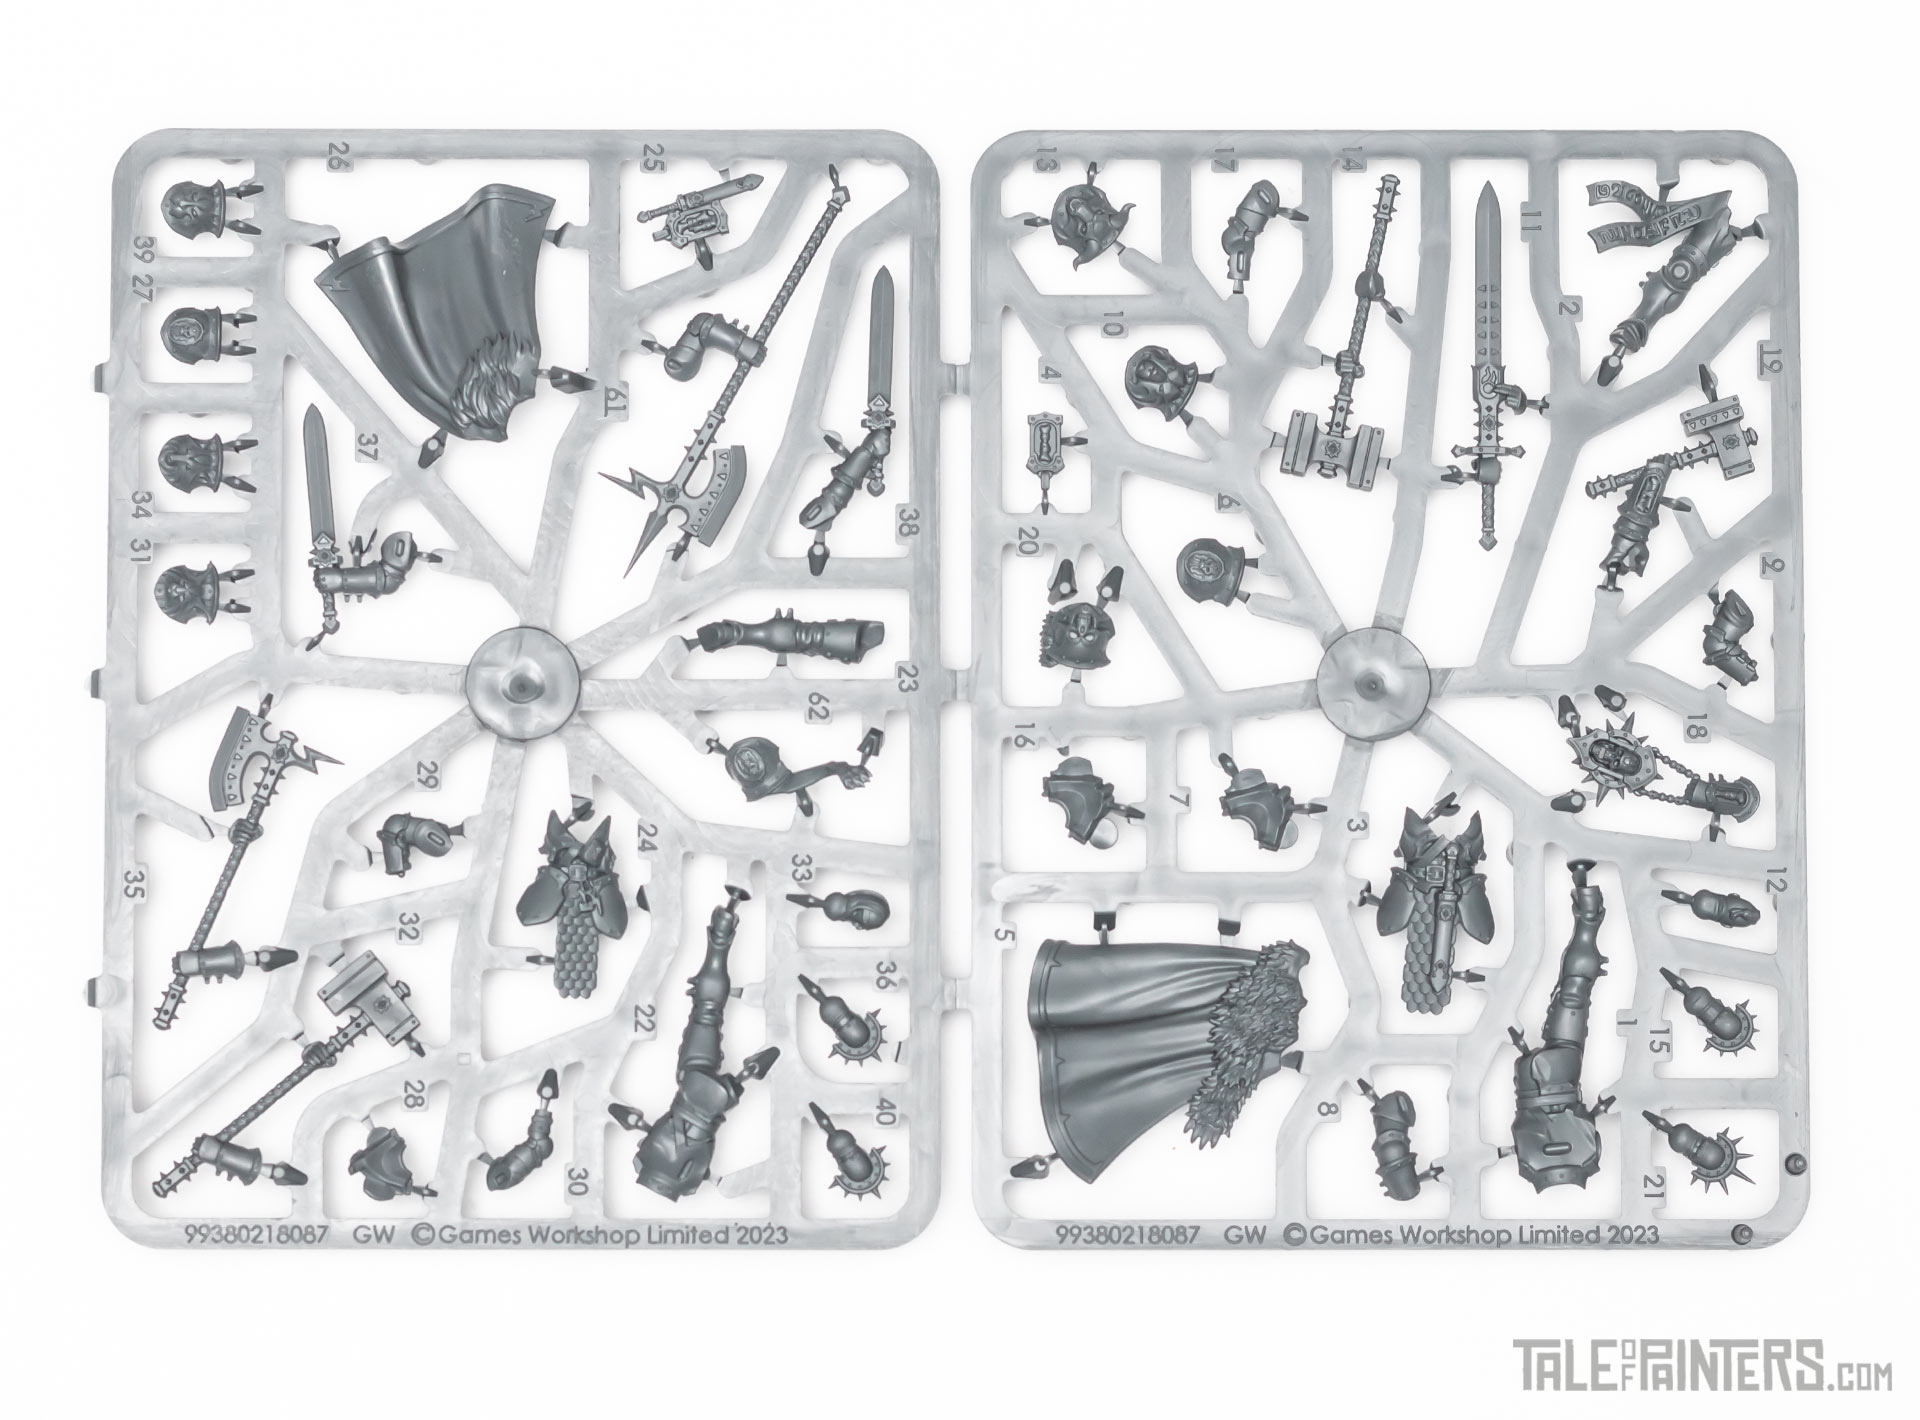 Questor Soulsworn sprues 1 and 2 from Warcry Nightmare Quest review